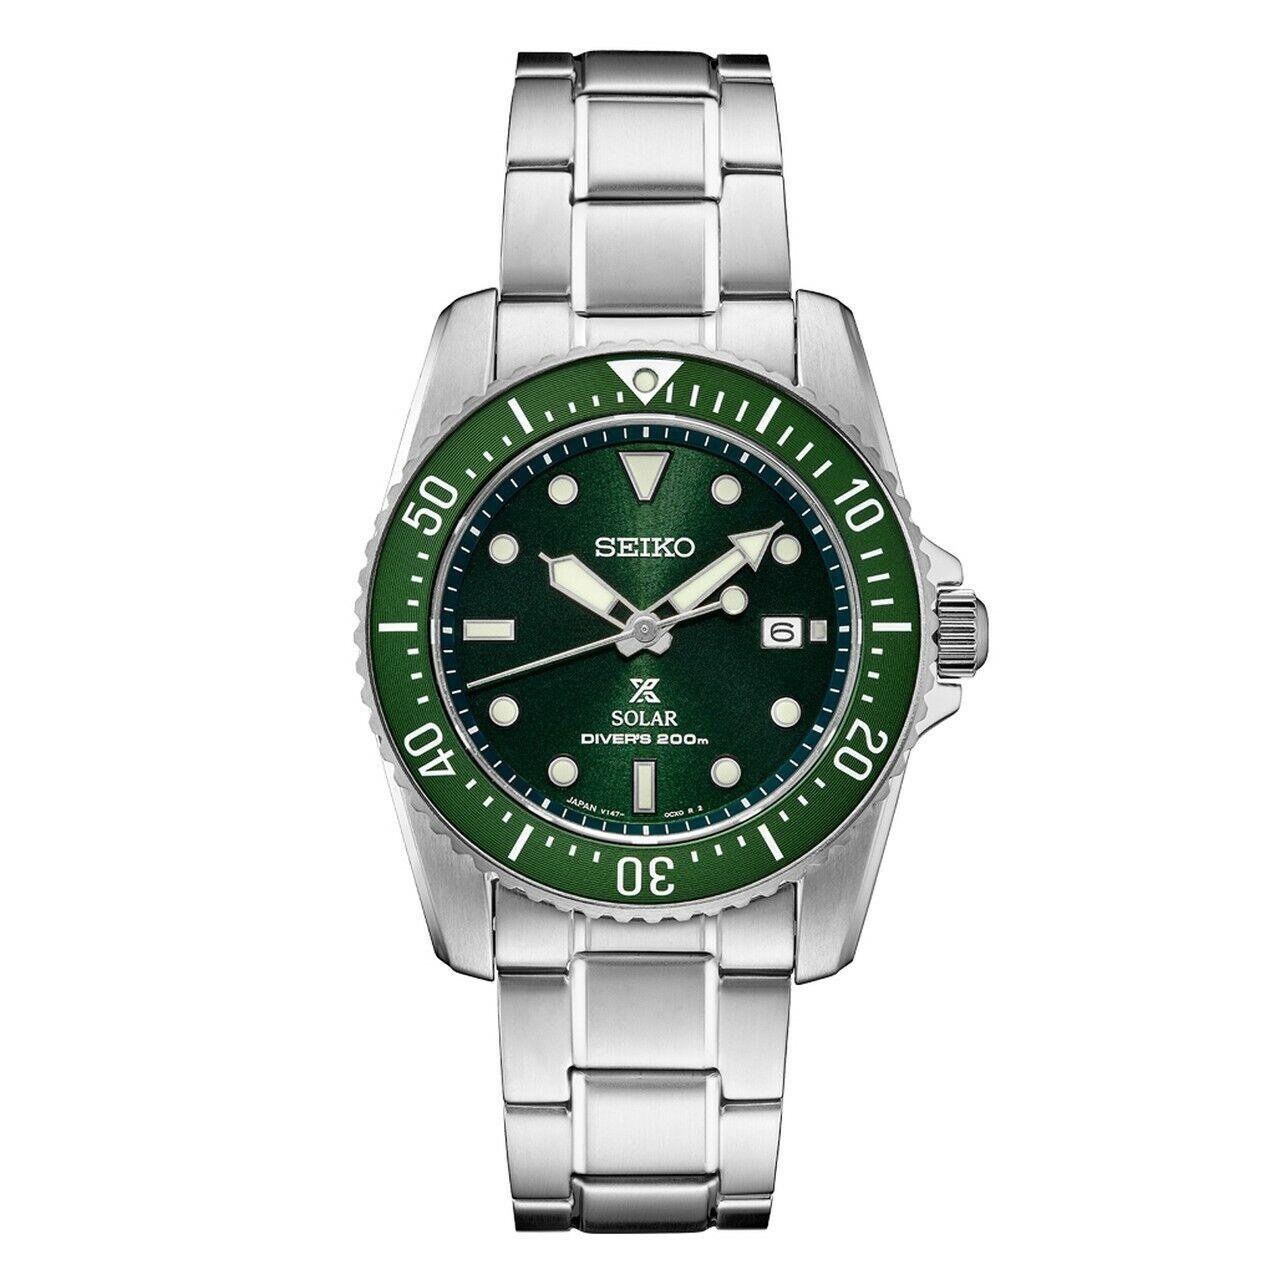 Seiko Men`s Prospex Solar Green Dial Stainless Steel Watch SNE583 - Green Dial, Silver Band